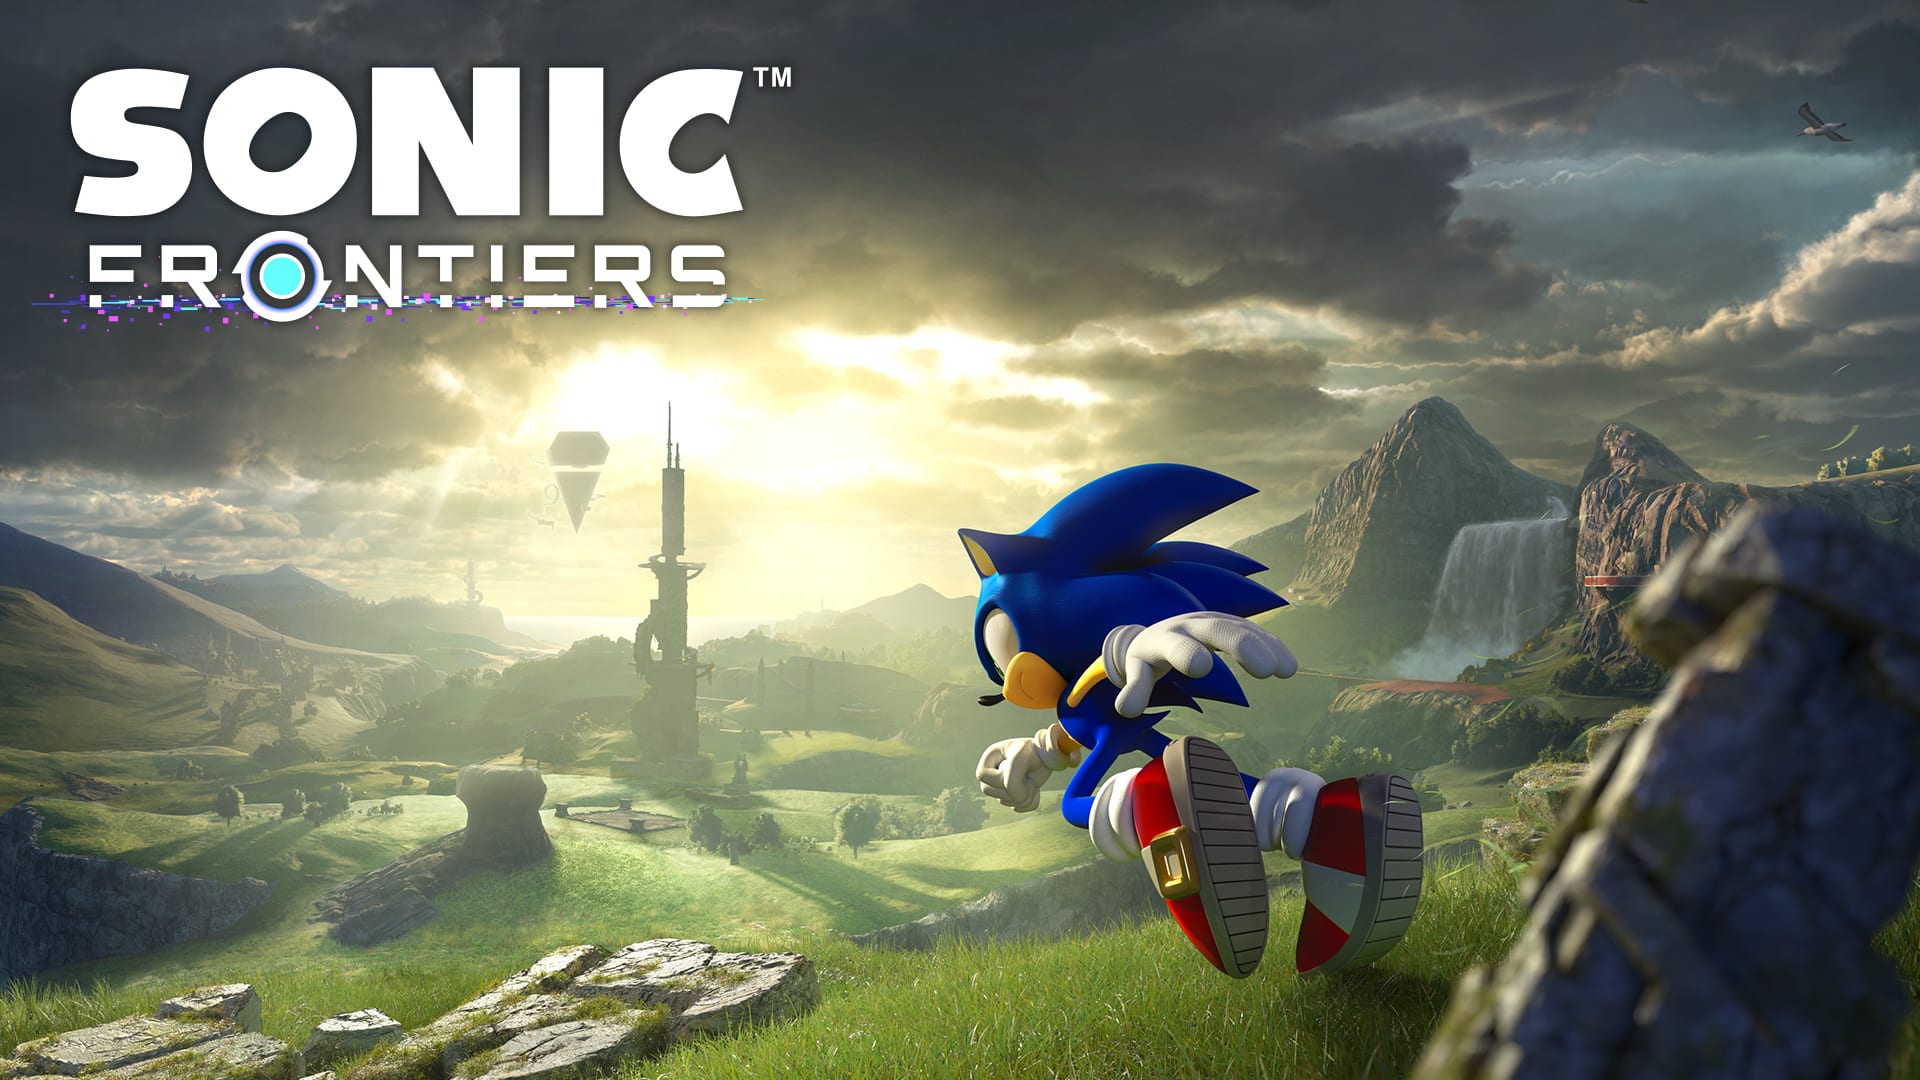 Sonic Frontiers: How to unlock Arcade Mode and what is it?